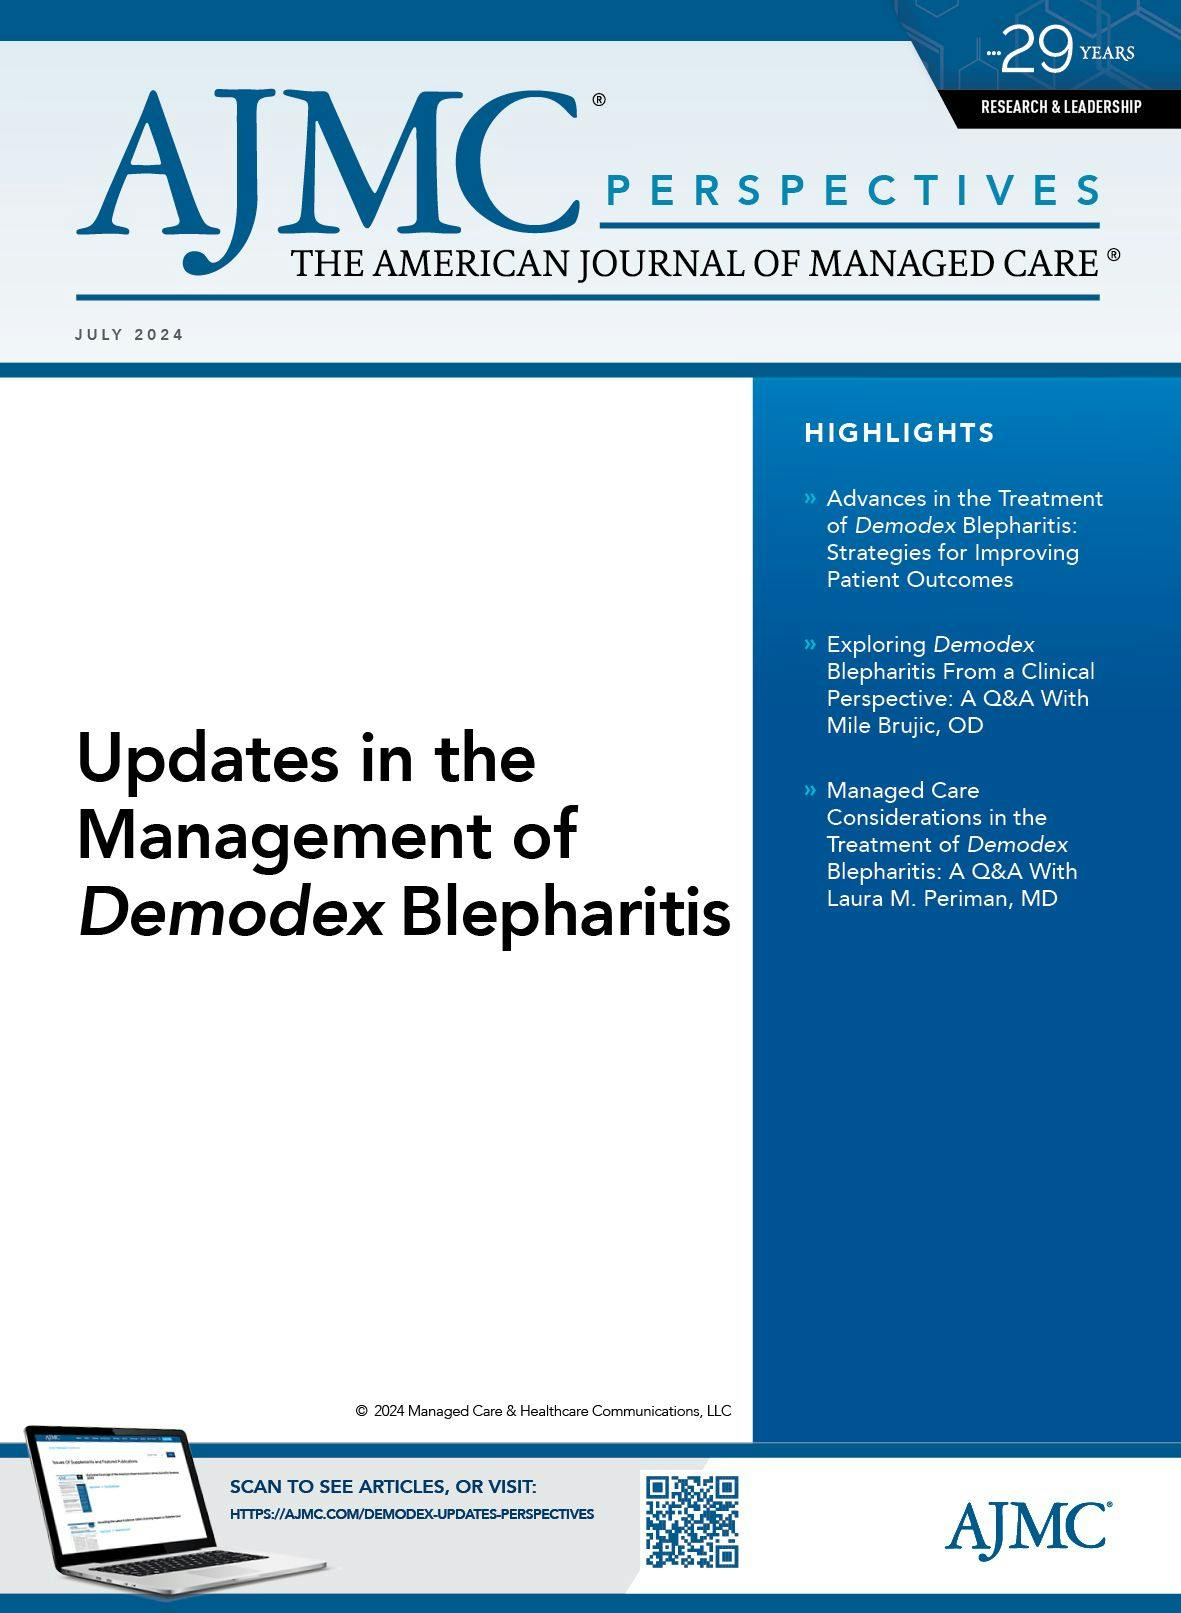 Updates in the Management of Demodex Blepharitis